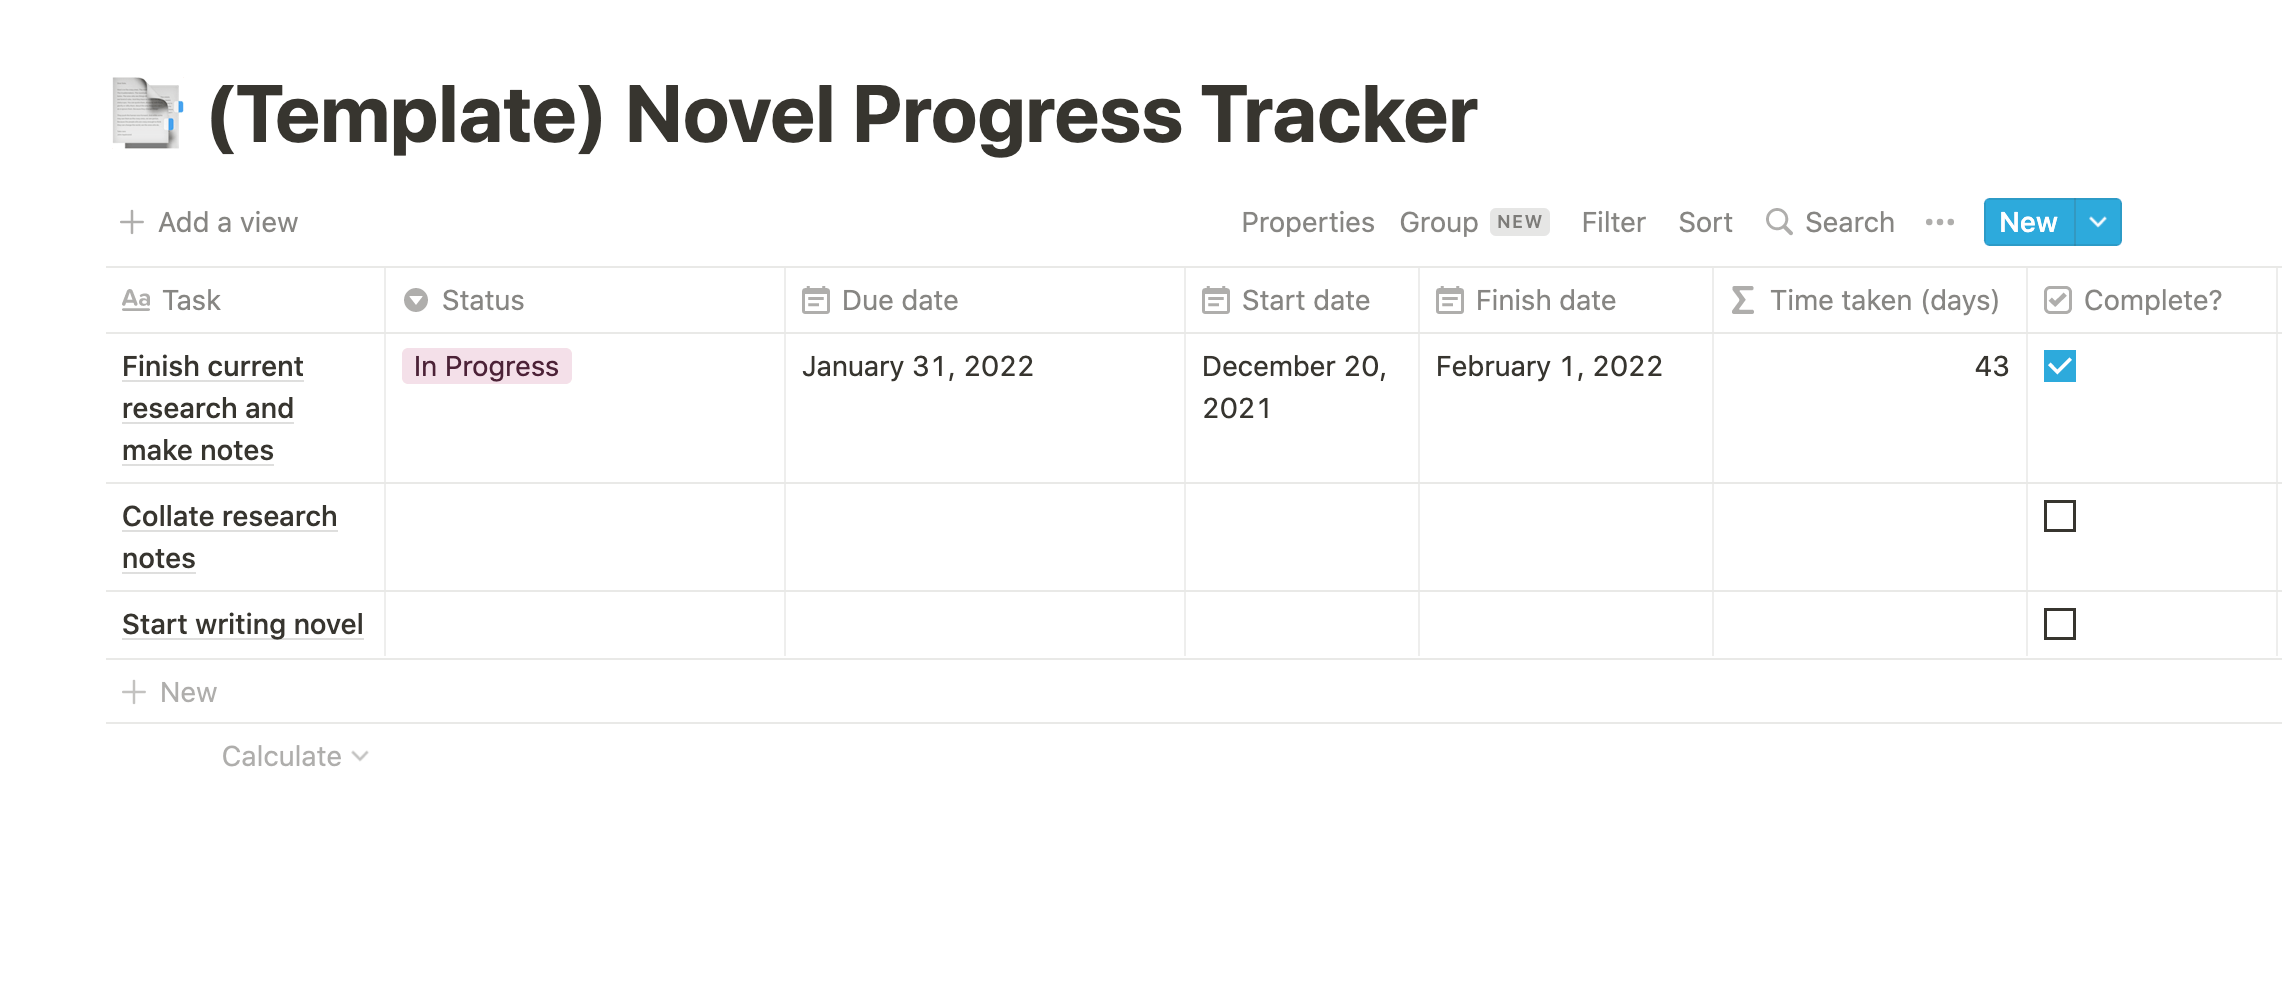 How Long Does it Actually Take to Make a Book? - Tracking the process